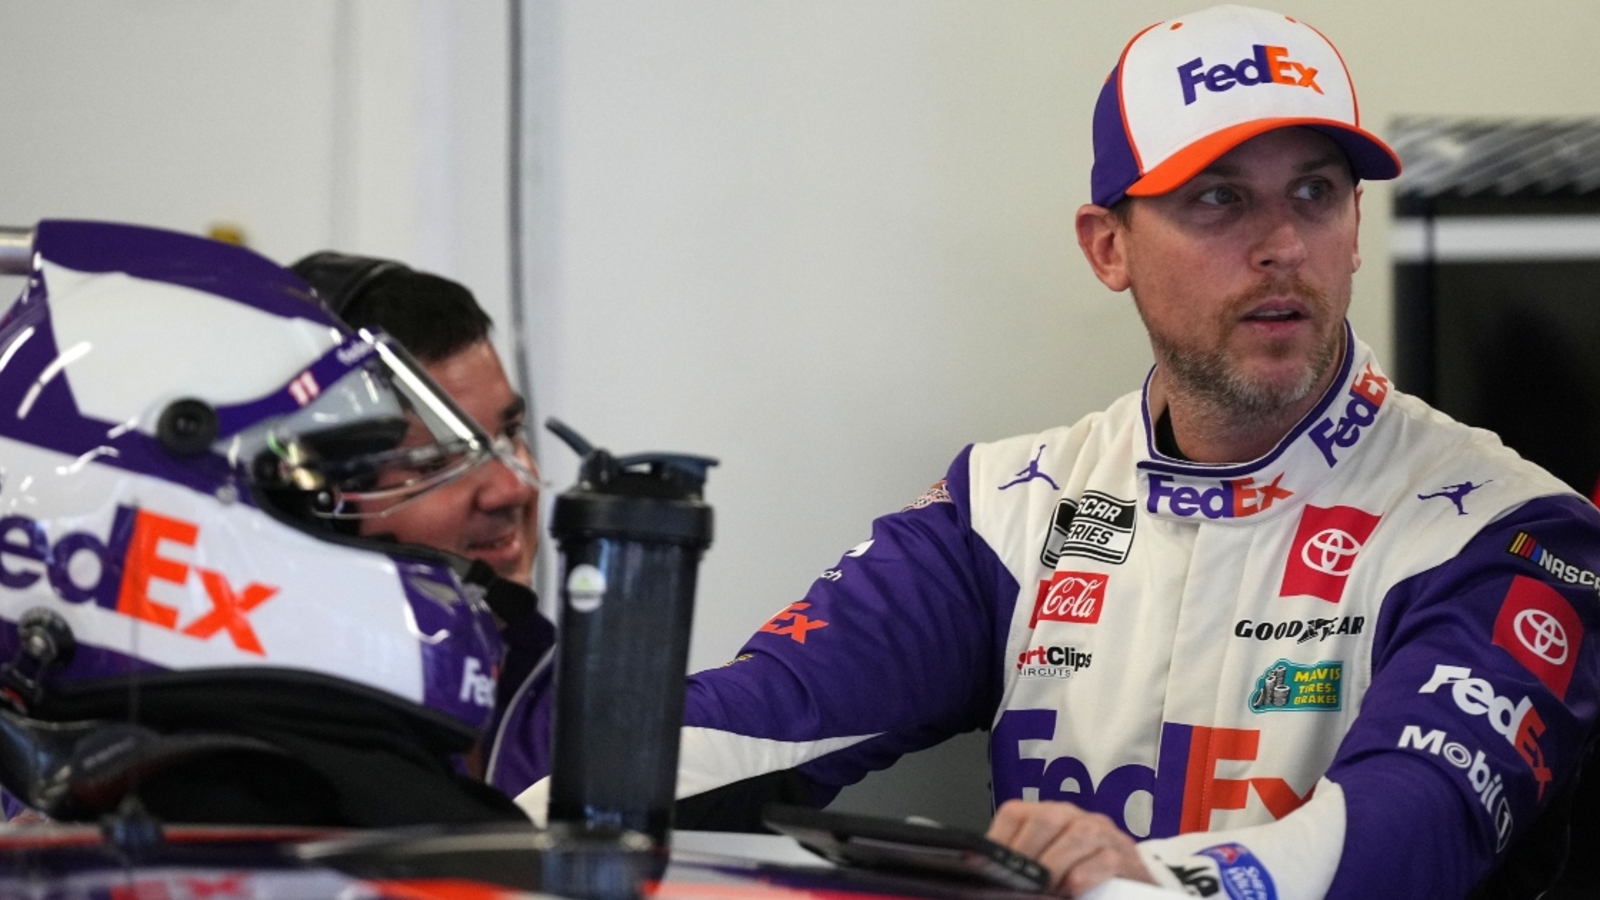 Denny Hamlin hoping to tie Cale Yarborough in Daytona 500 wins with ‘aggression’